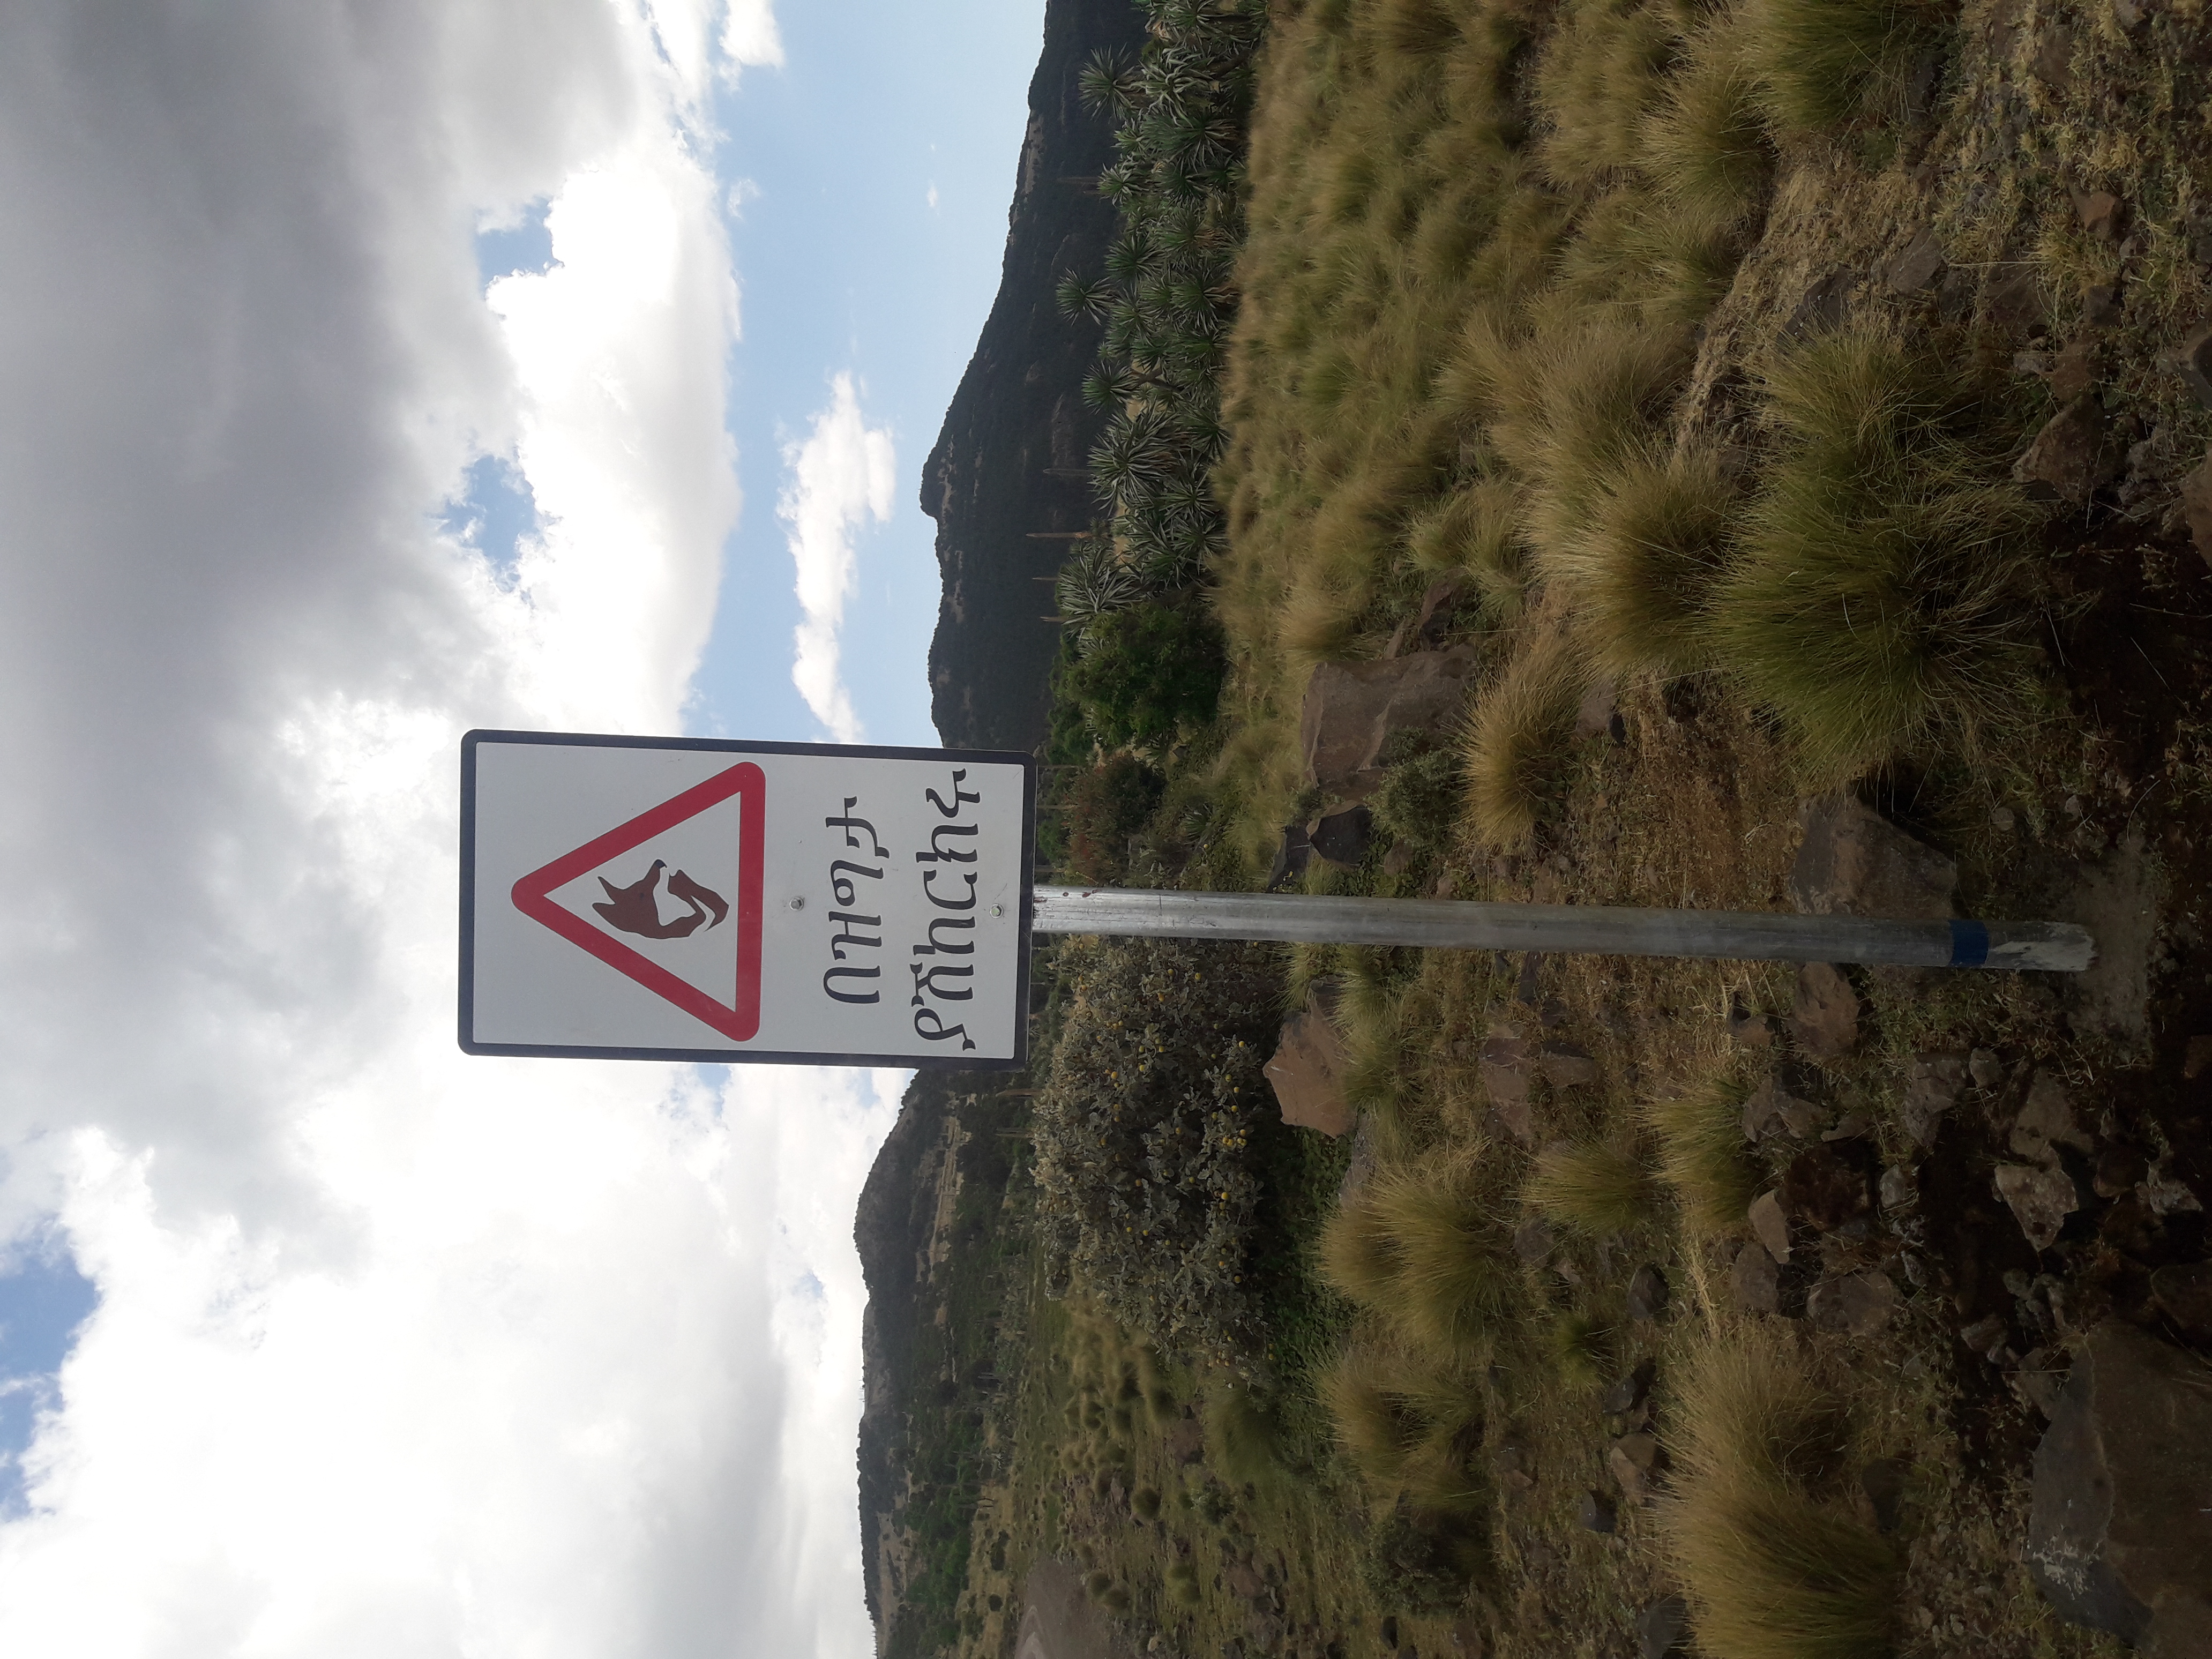 Installed road sign with Ethiopian wolf and Amharic text